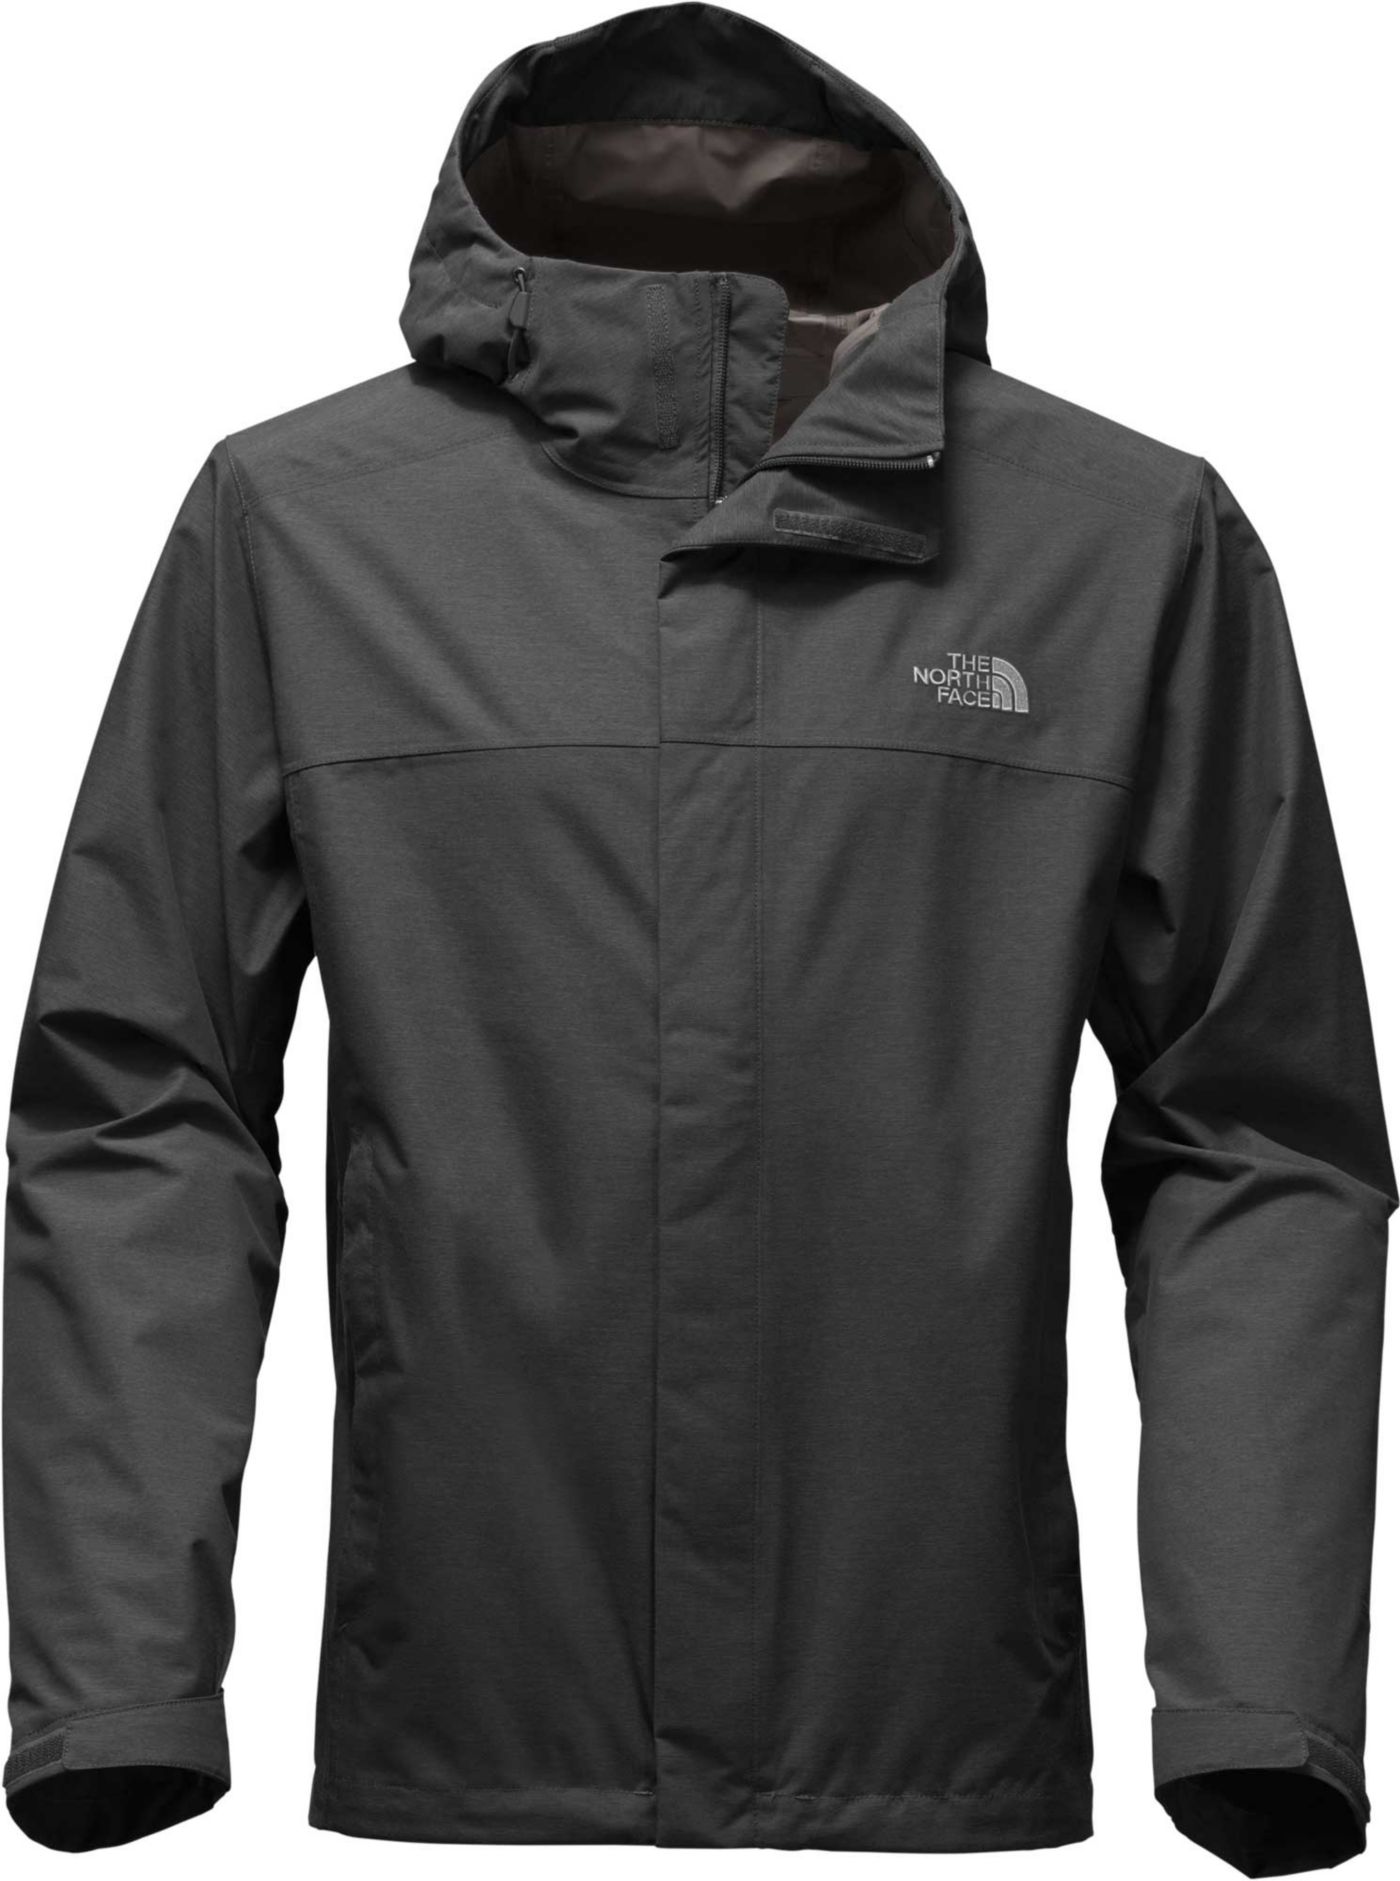 The North Face Men's Venture 2 Jacket (Regular and Big & Tall) | DICK'S ...